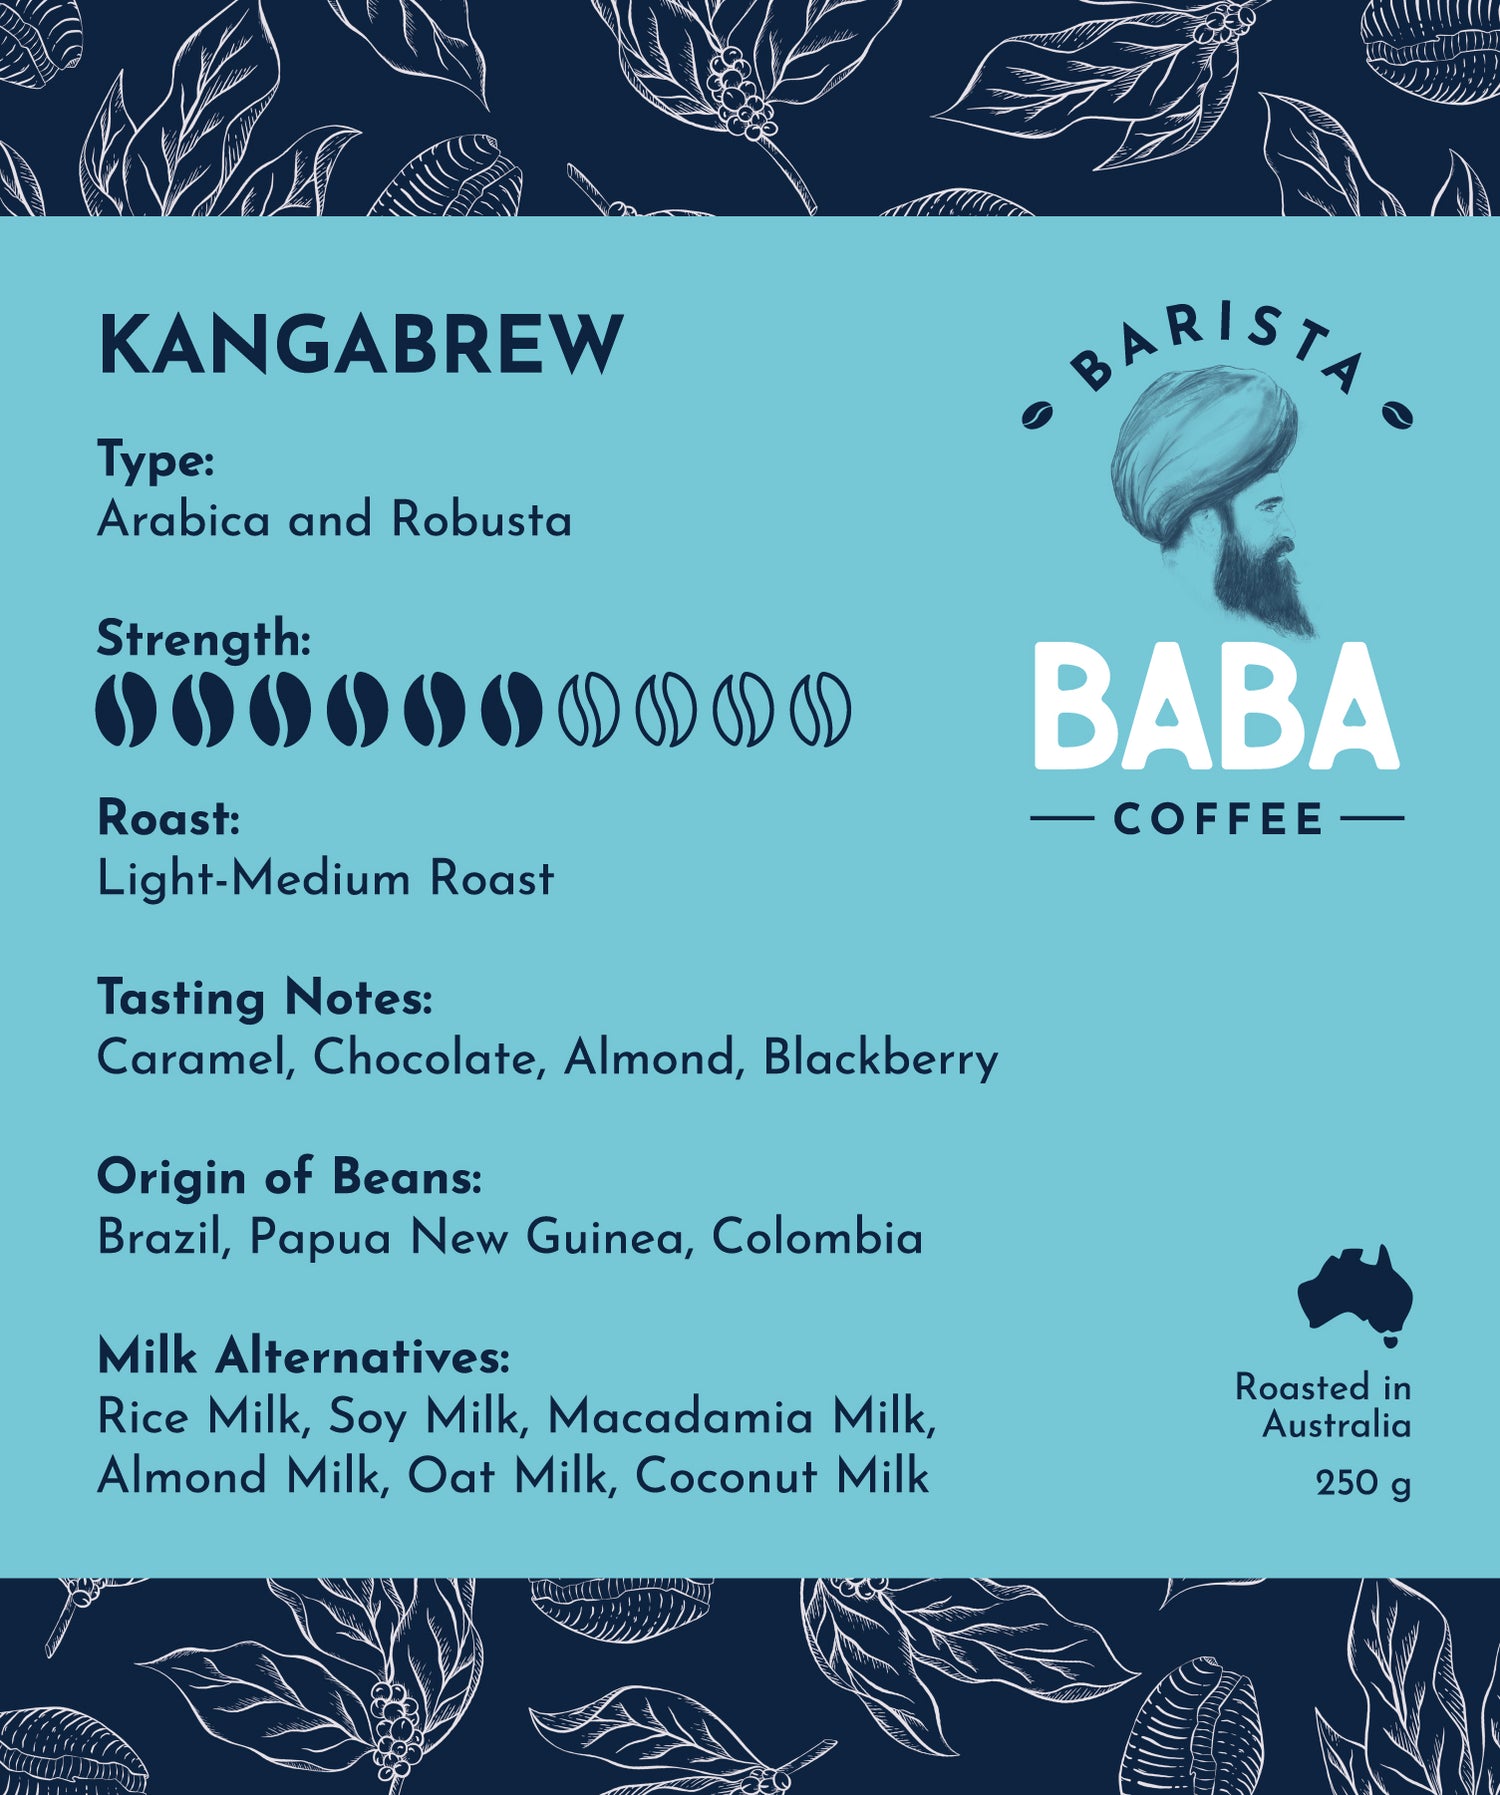 Label of a 250g bag of Kangabrew coffee beans by Barista Baba Coffee